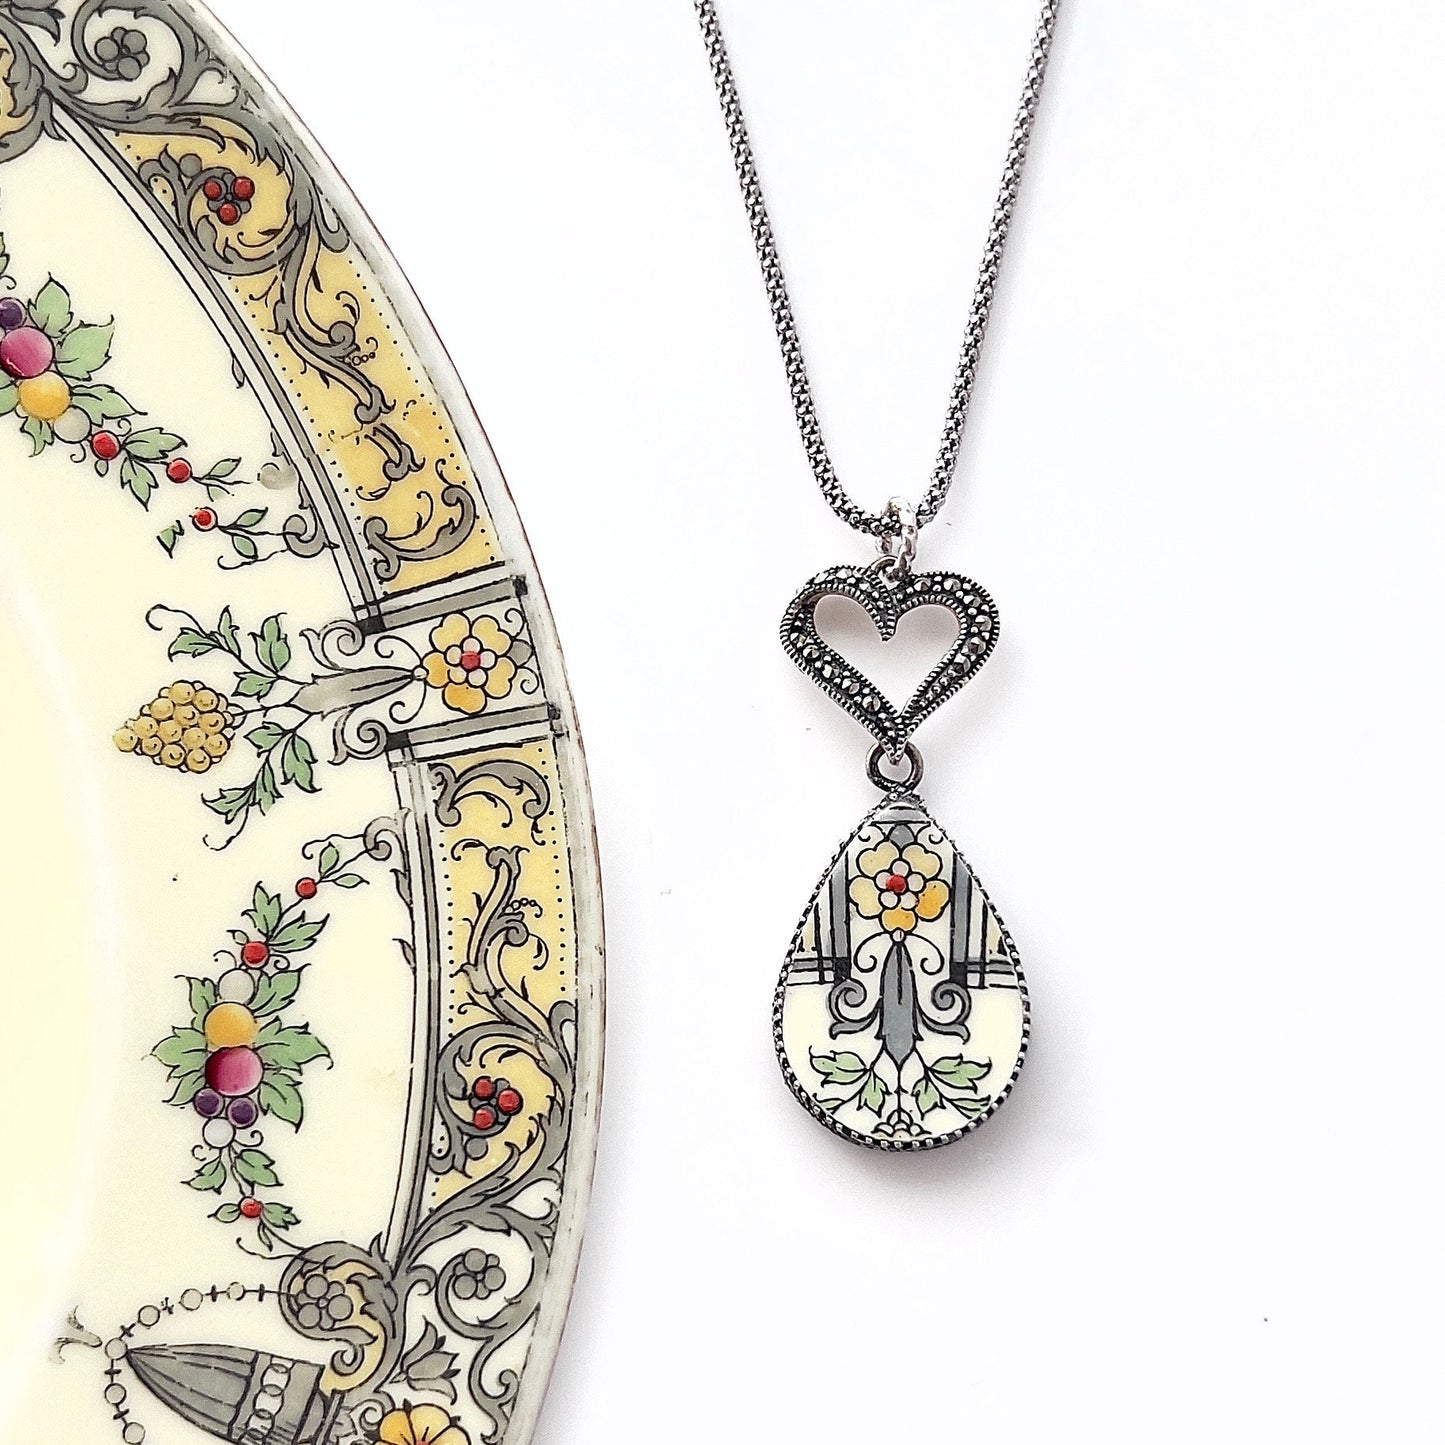 Victorian Heart Pendant Necklace, Broken China Jewelry, Unique 20th Anniversary Gift for Wife, Marcasite Necklace and Earrings, Jewelry Set